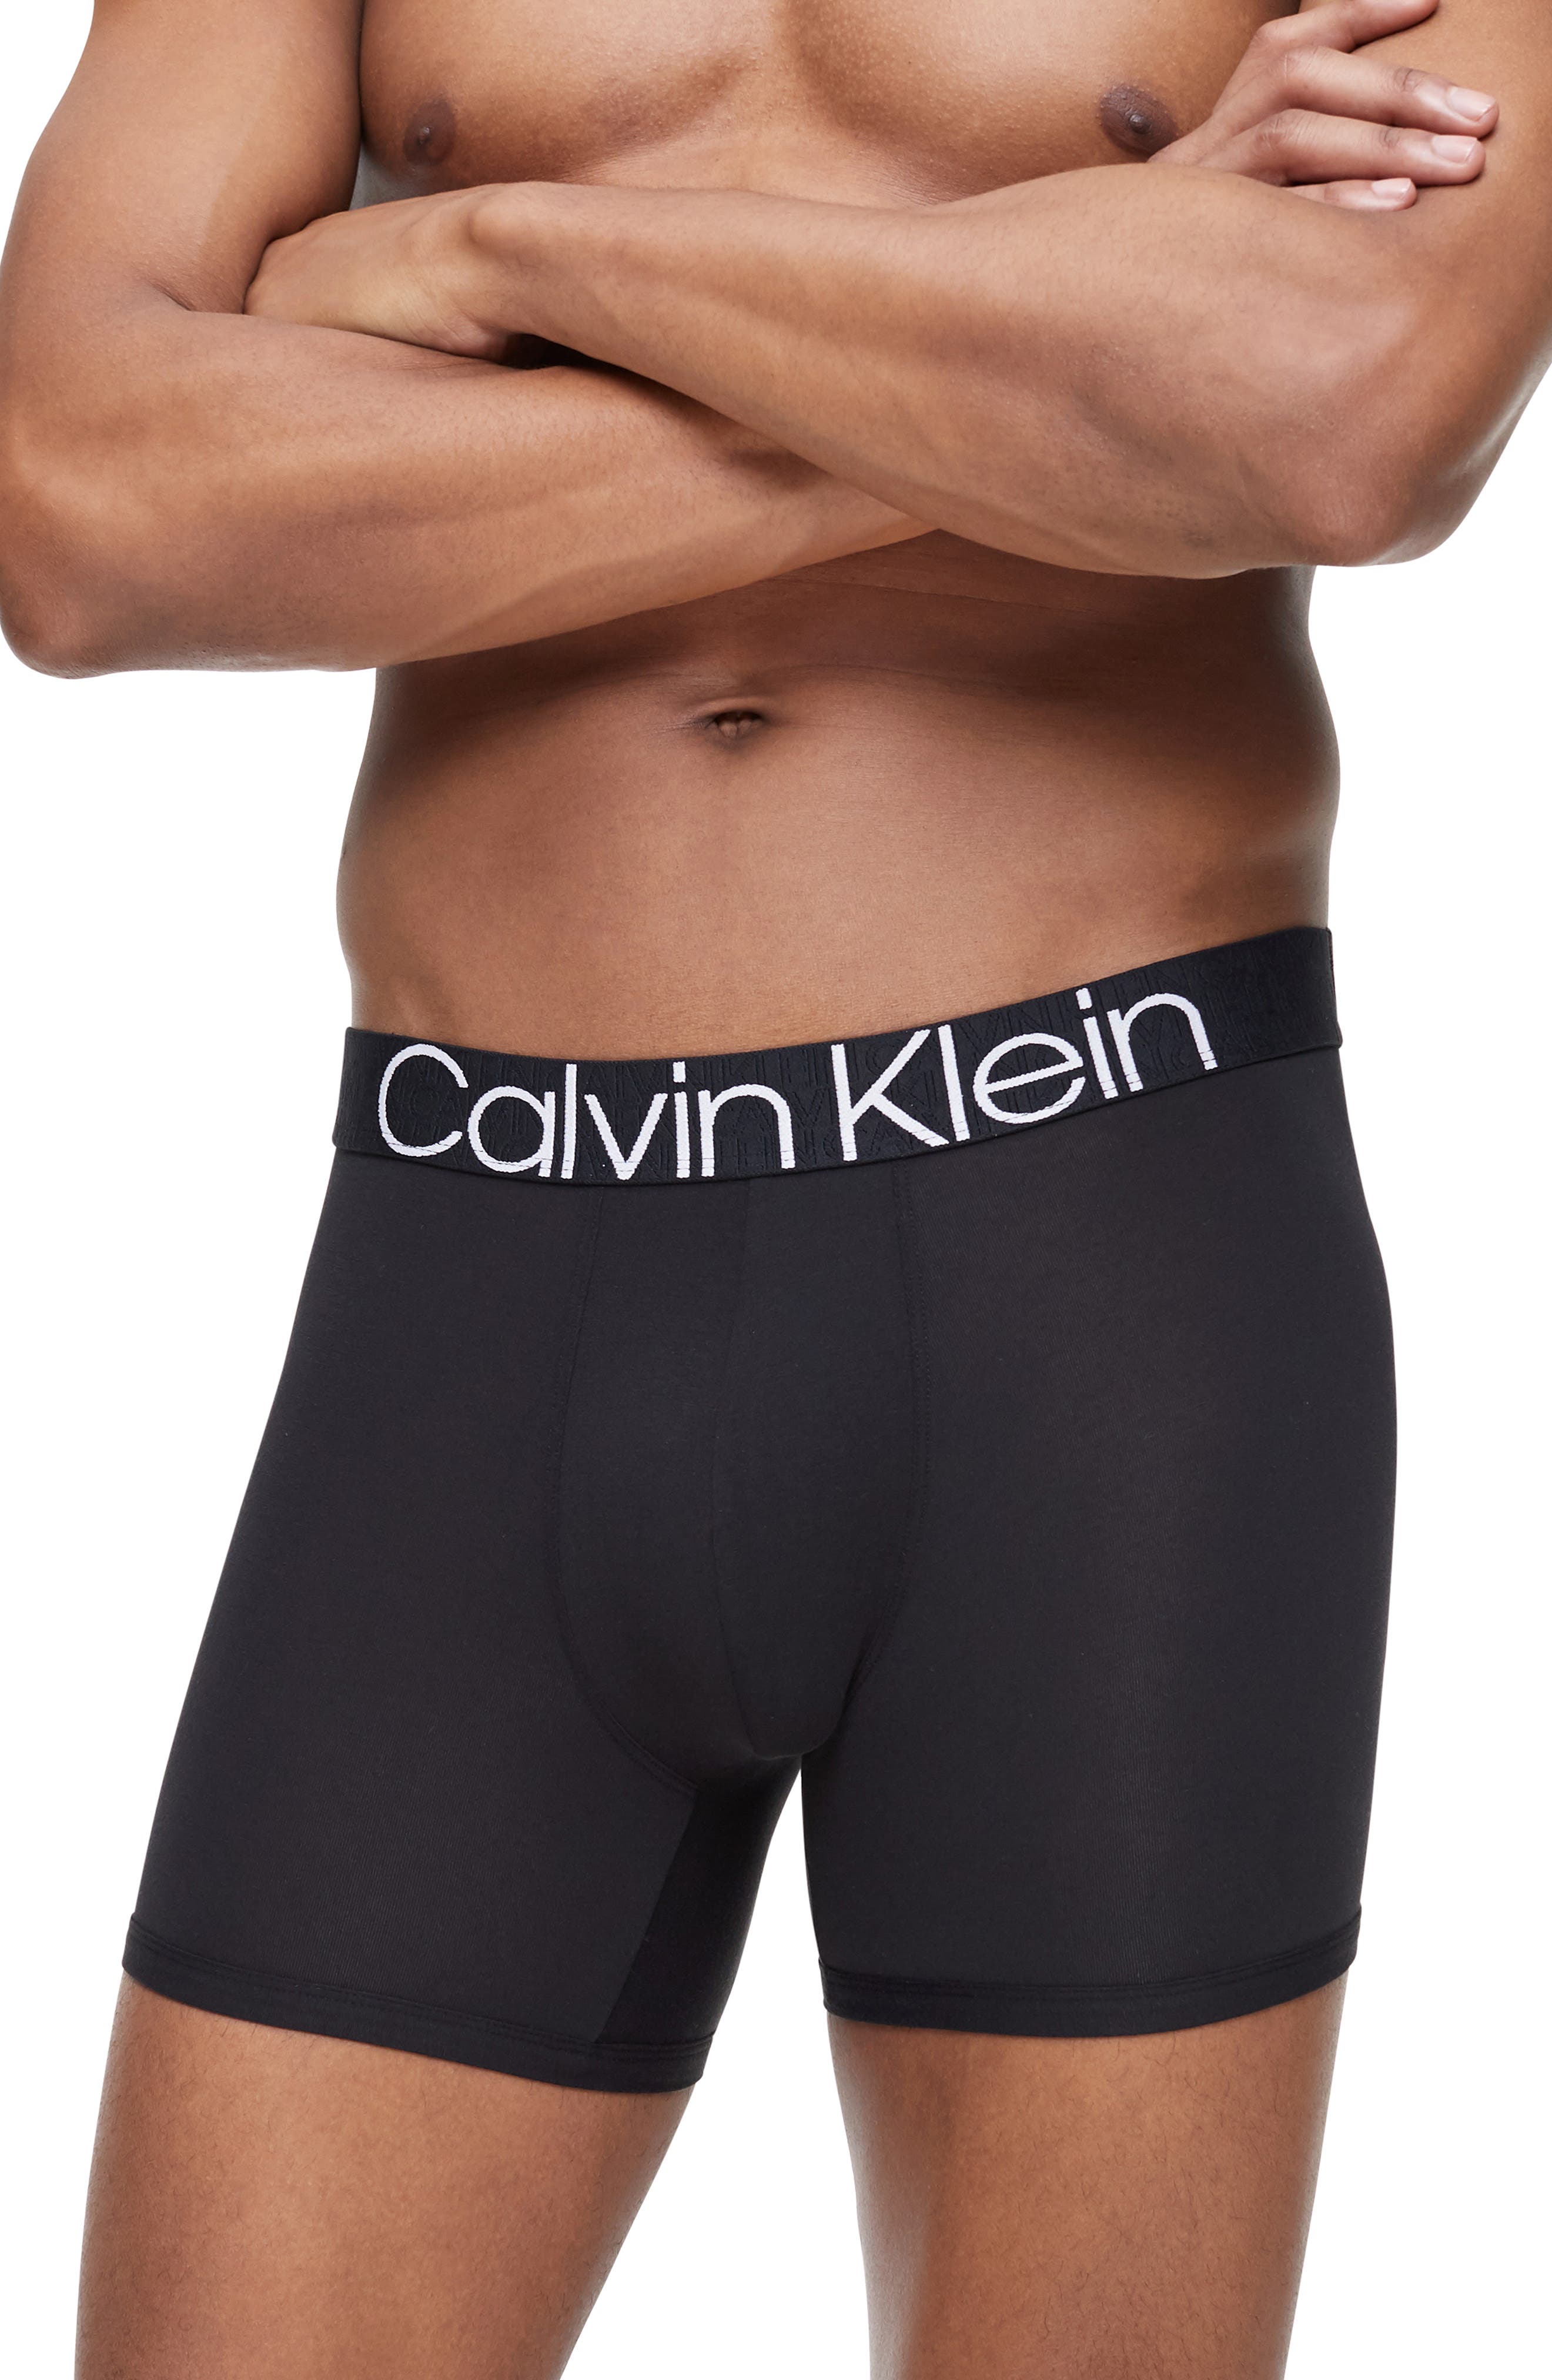 UPC 790812539354 product image for Calvin Klein Eco Cotton Blend Boxer Briefs, Size X-Large in Black at Nordstrom | upcitemdb.com